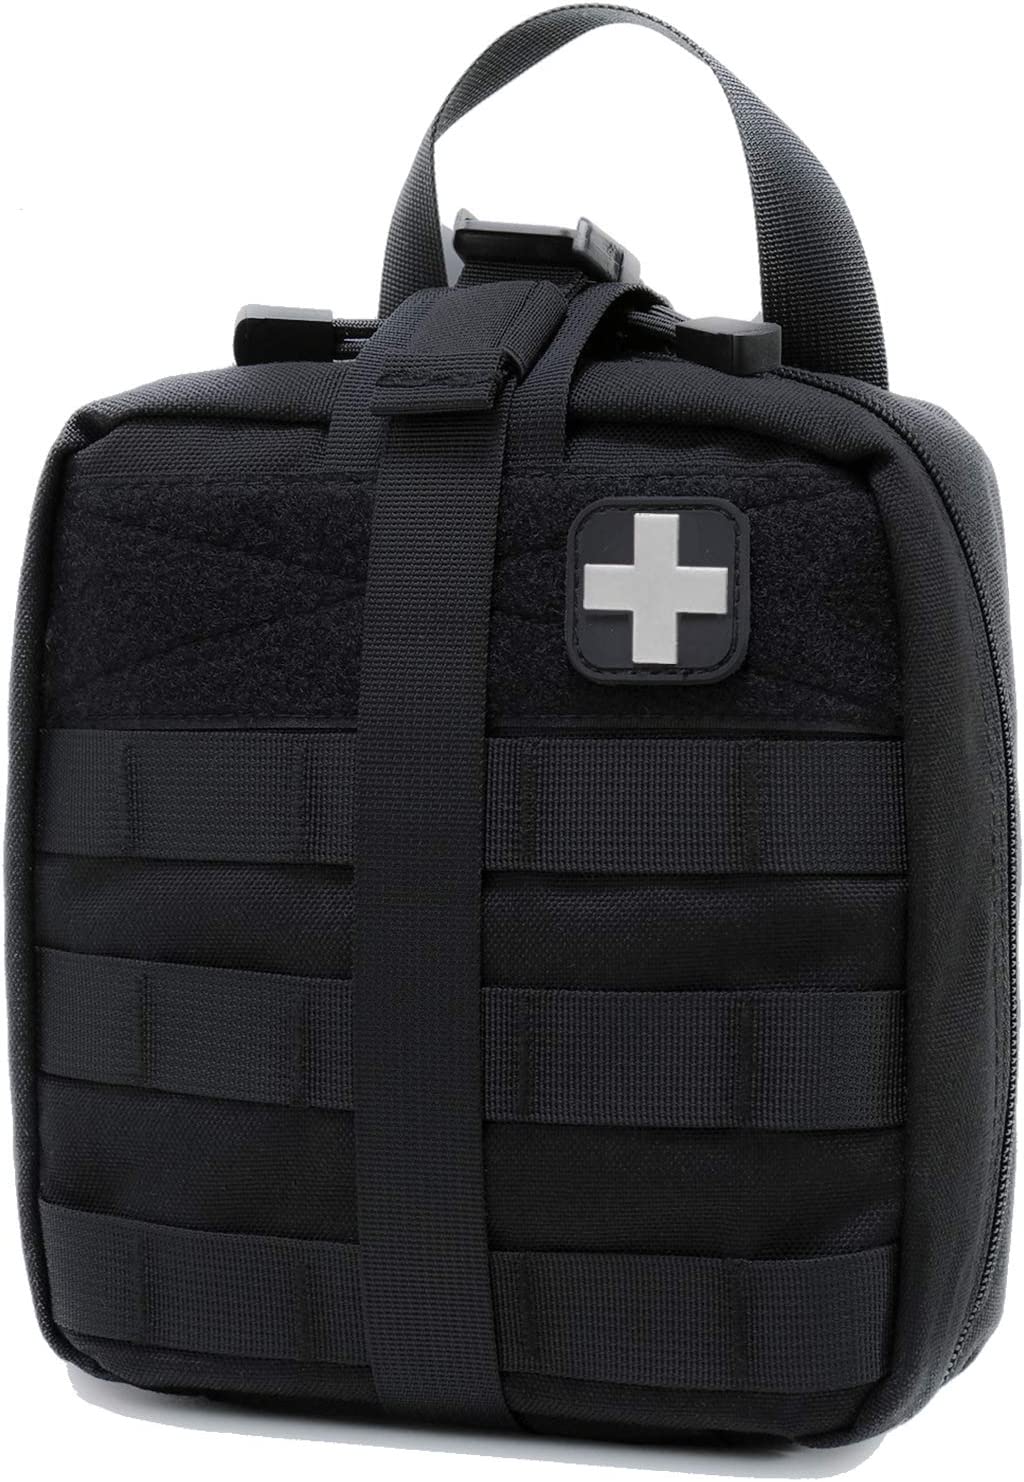 Rip-Away EMT Pouch Molle Pouch Ifak Pouch Medical First Aid Kit Utility Pouch 1000D Nylon Carlebben (with Medical Supplies)